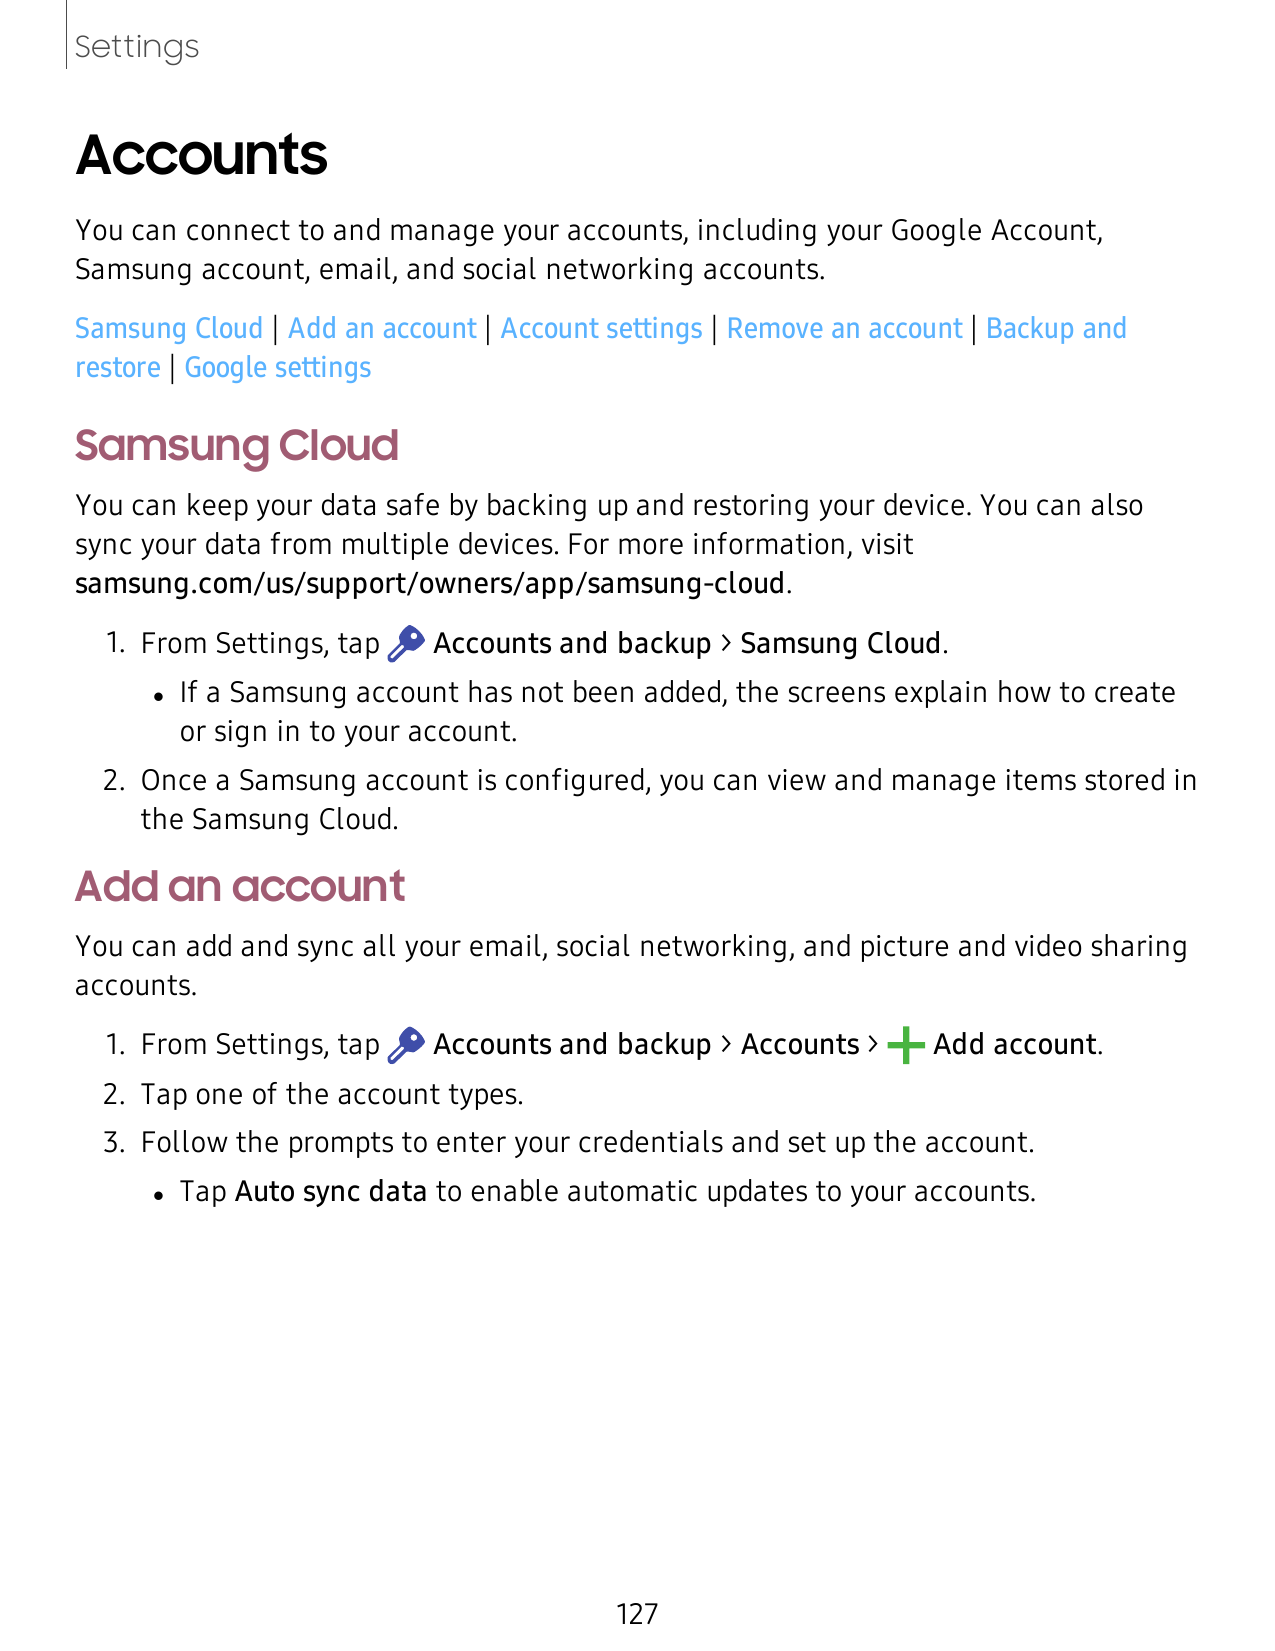 SettingsAccountsYou can connect to and manage your accounts, including your Google Account,Samsung account, email, and social ne